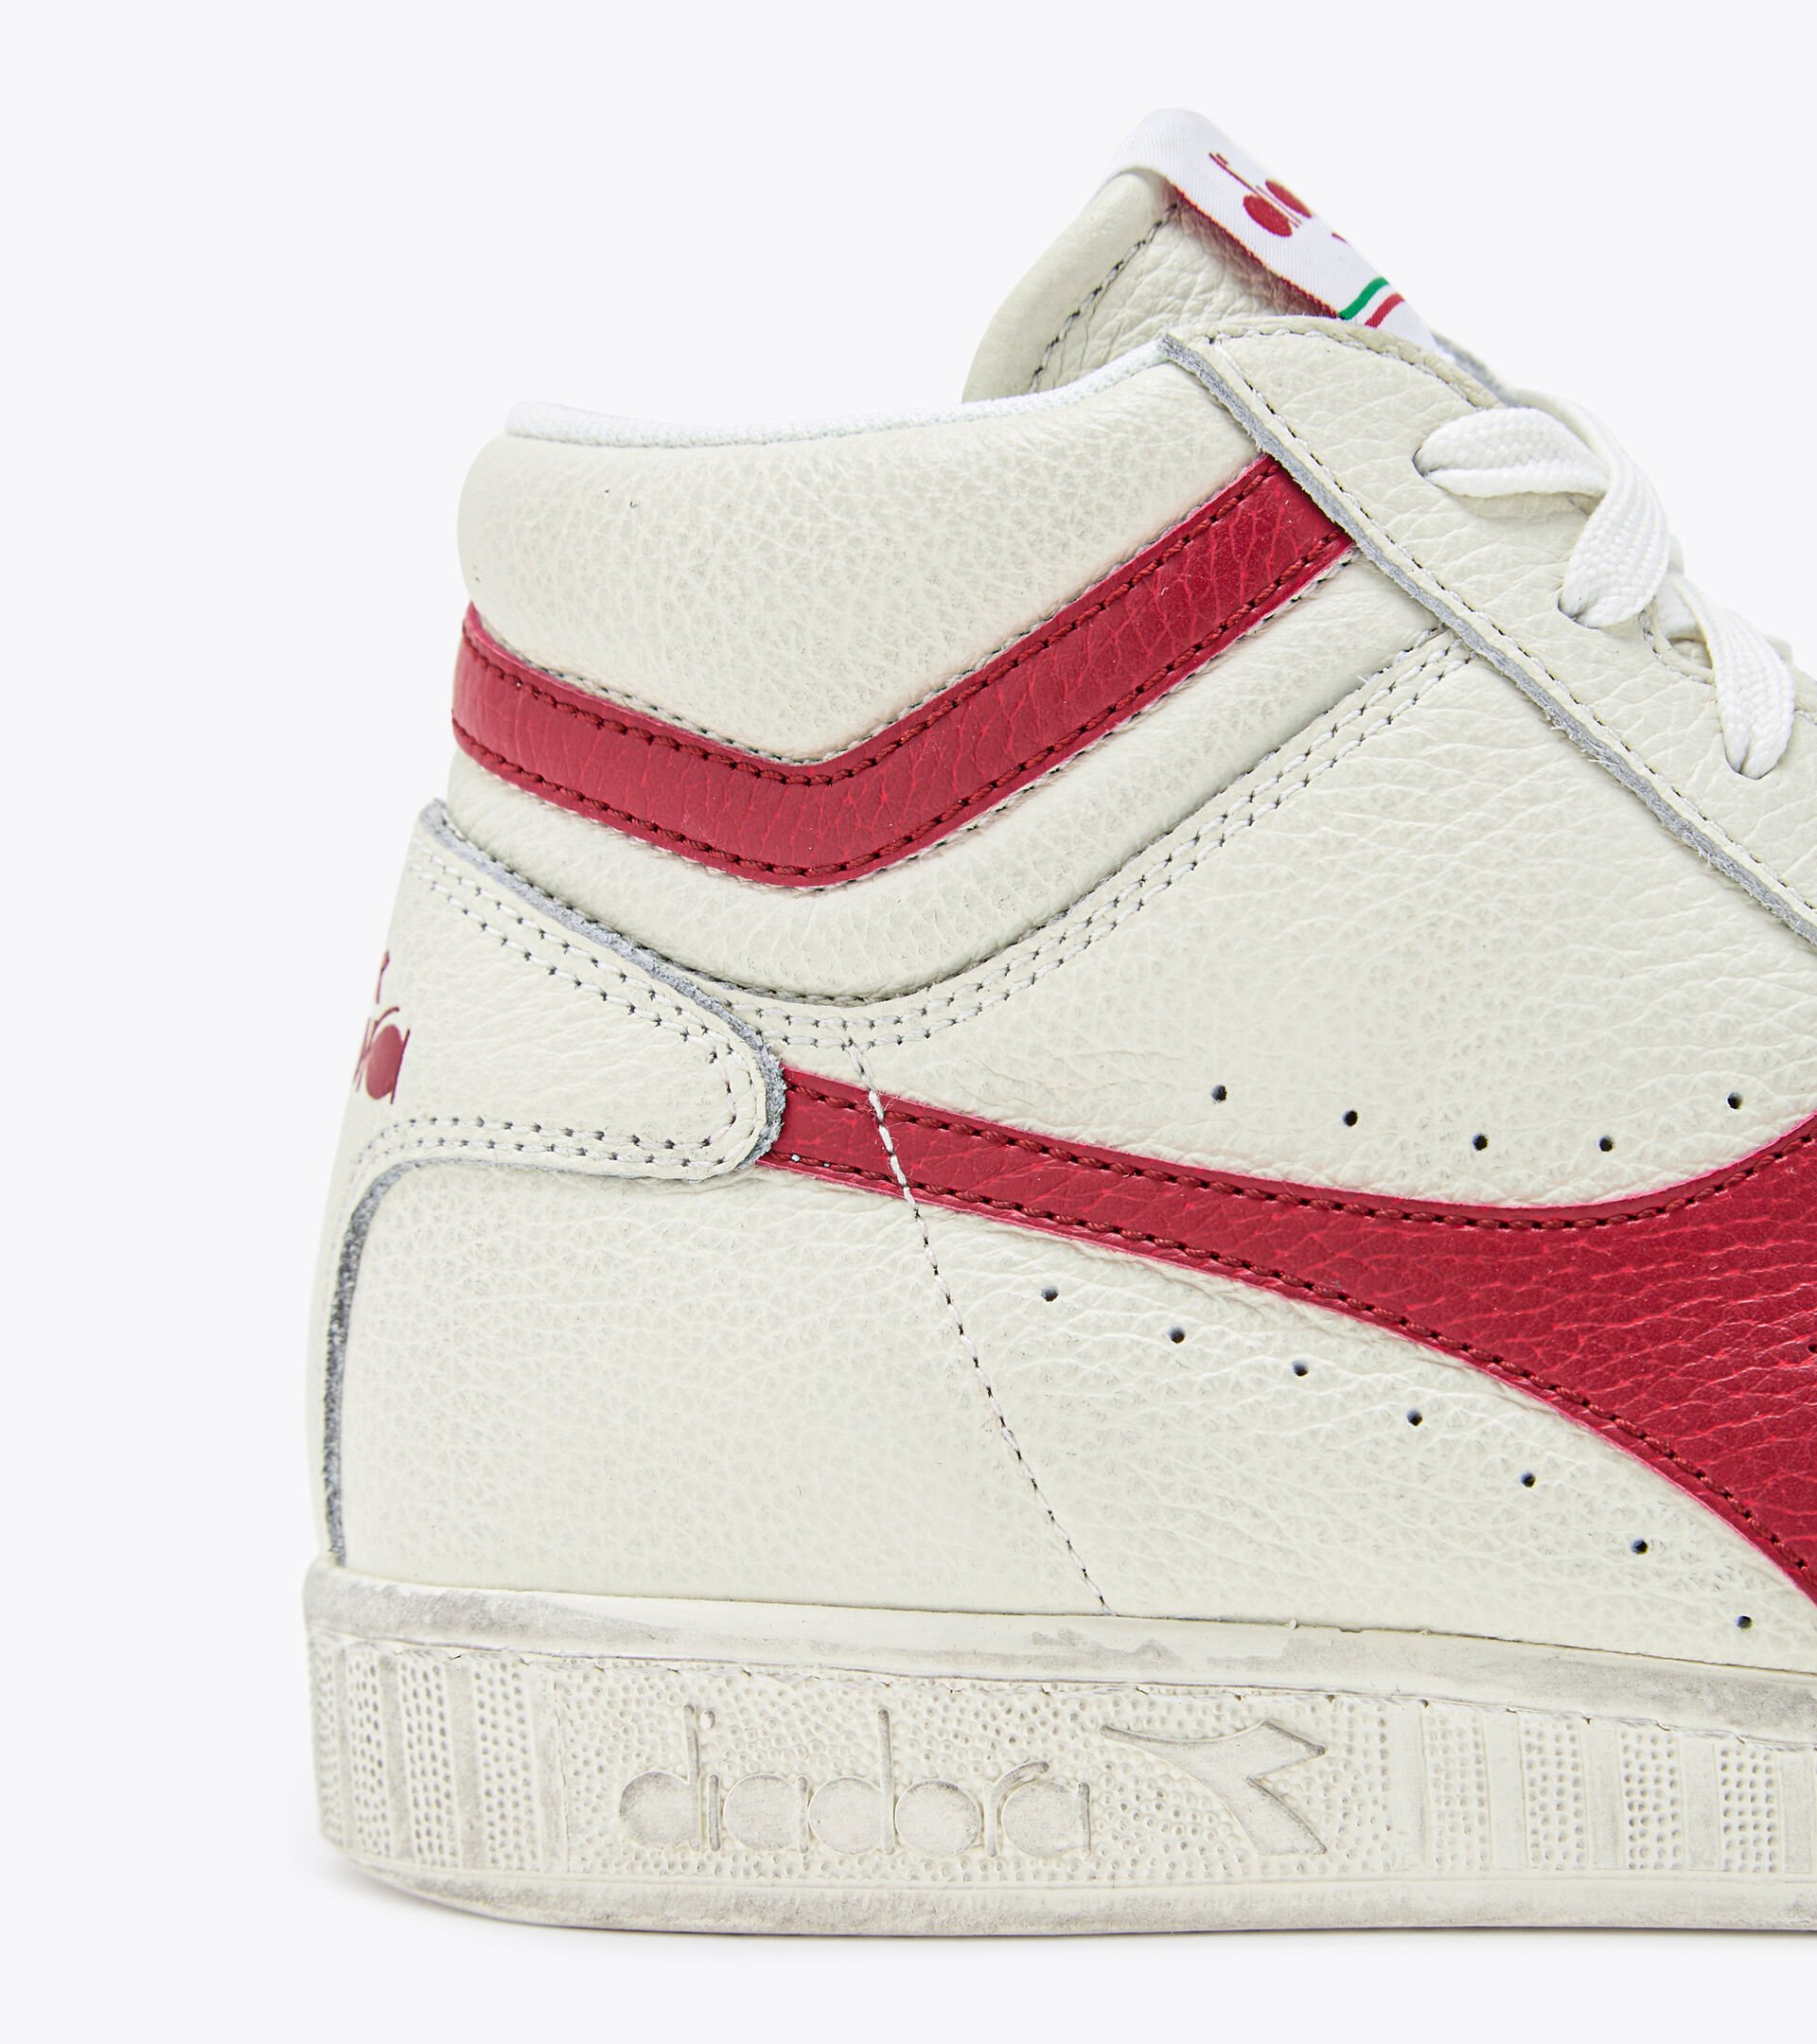 Sporty sneakers - Gender neutral GAME L HIGH WAXED WHITE/RED PEPPER - Diadora